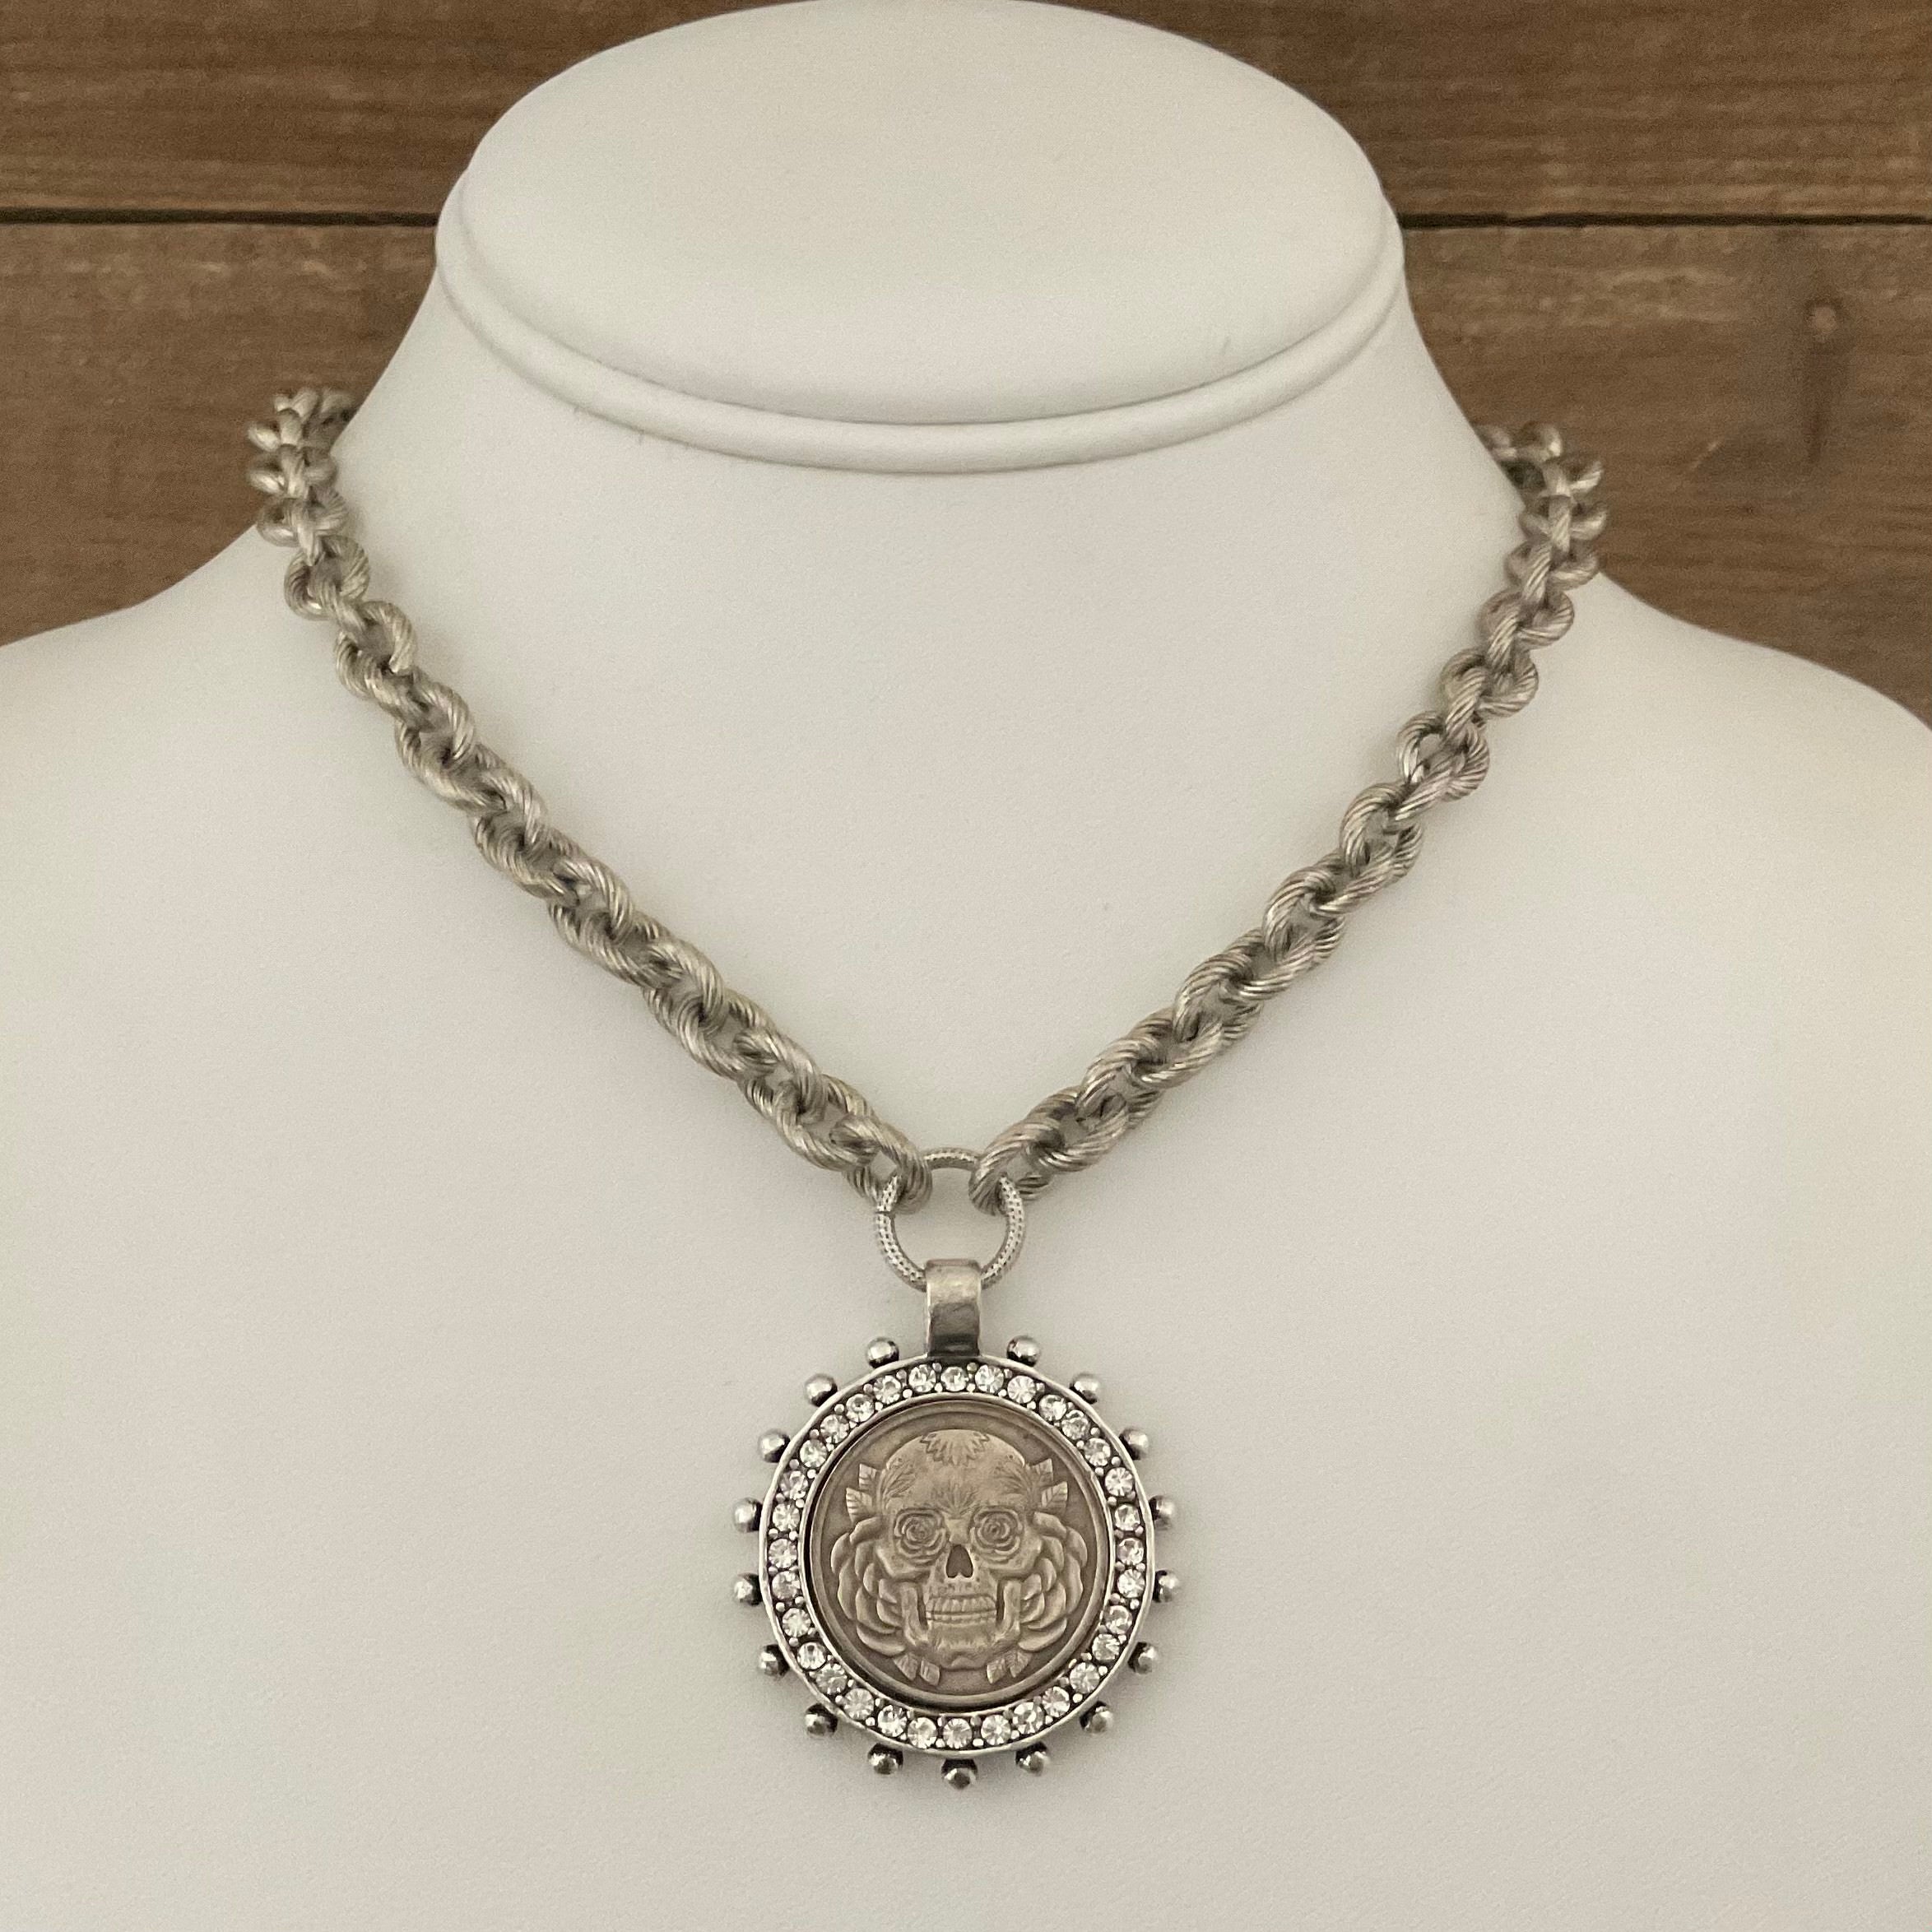 Vintage Silver Plated Chain with Silver Skull Coin